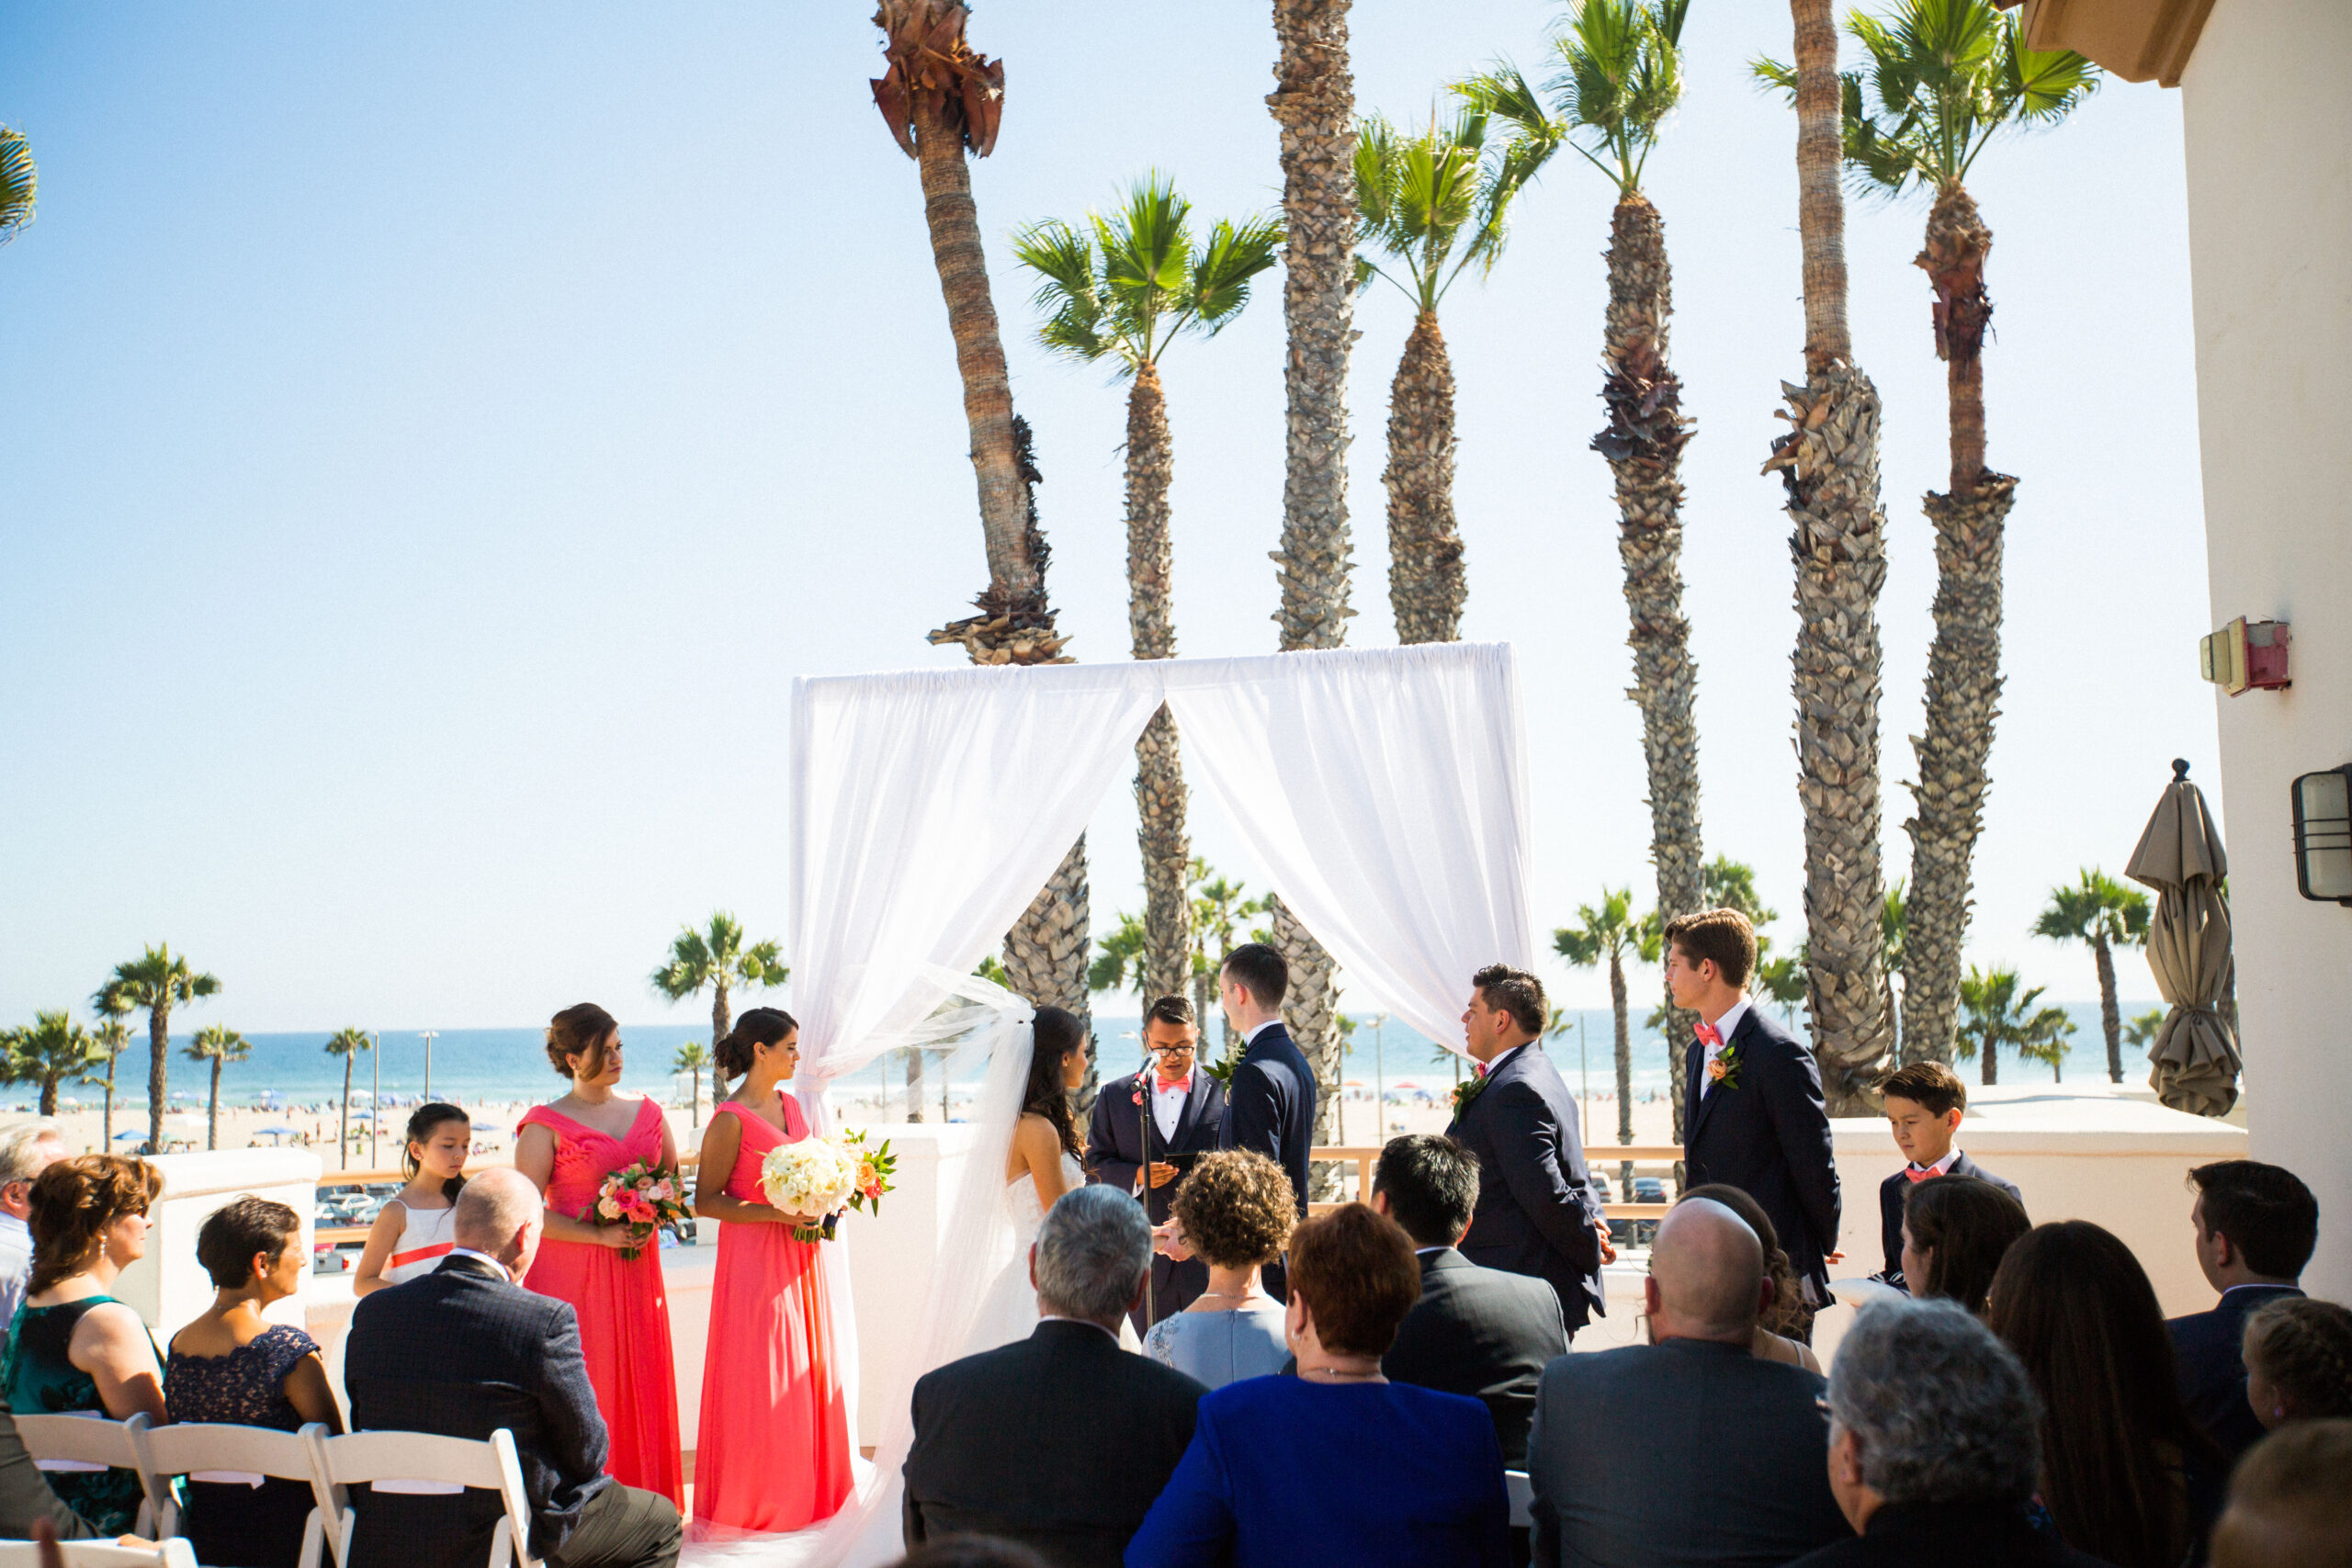 Bride and Groom take their vows during their Hilton Waterfront Beach Resort wedding venue in Huntington Beach as wedding party and guests look on.